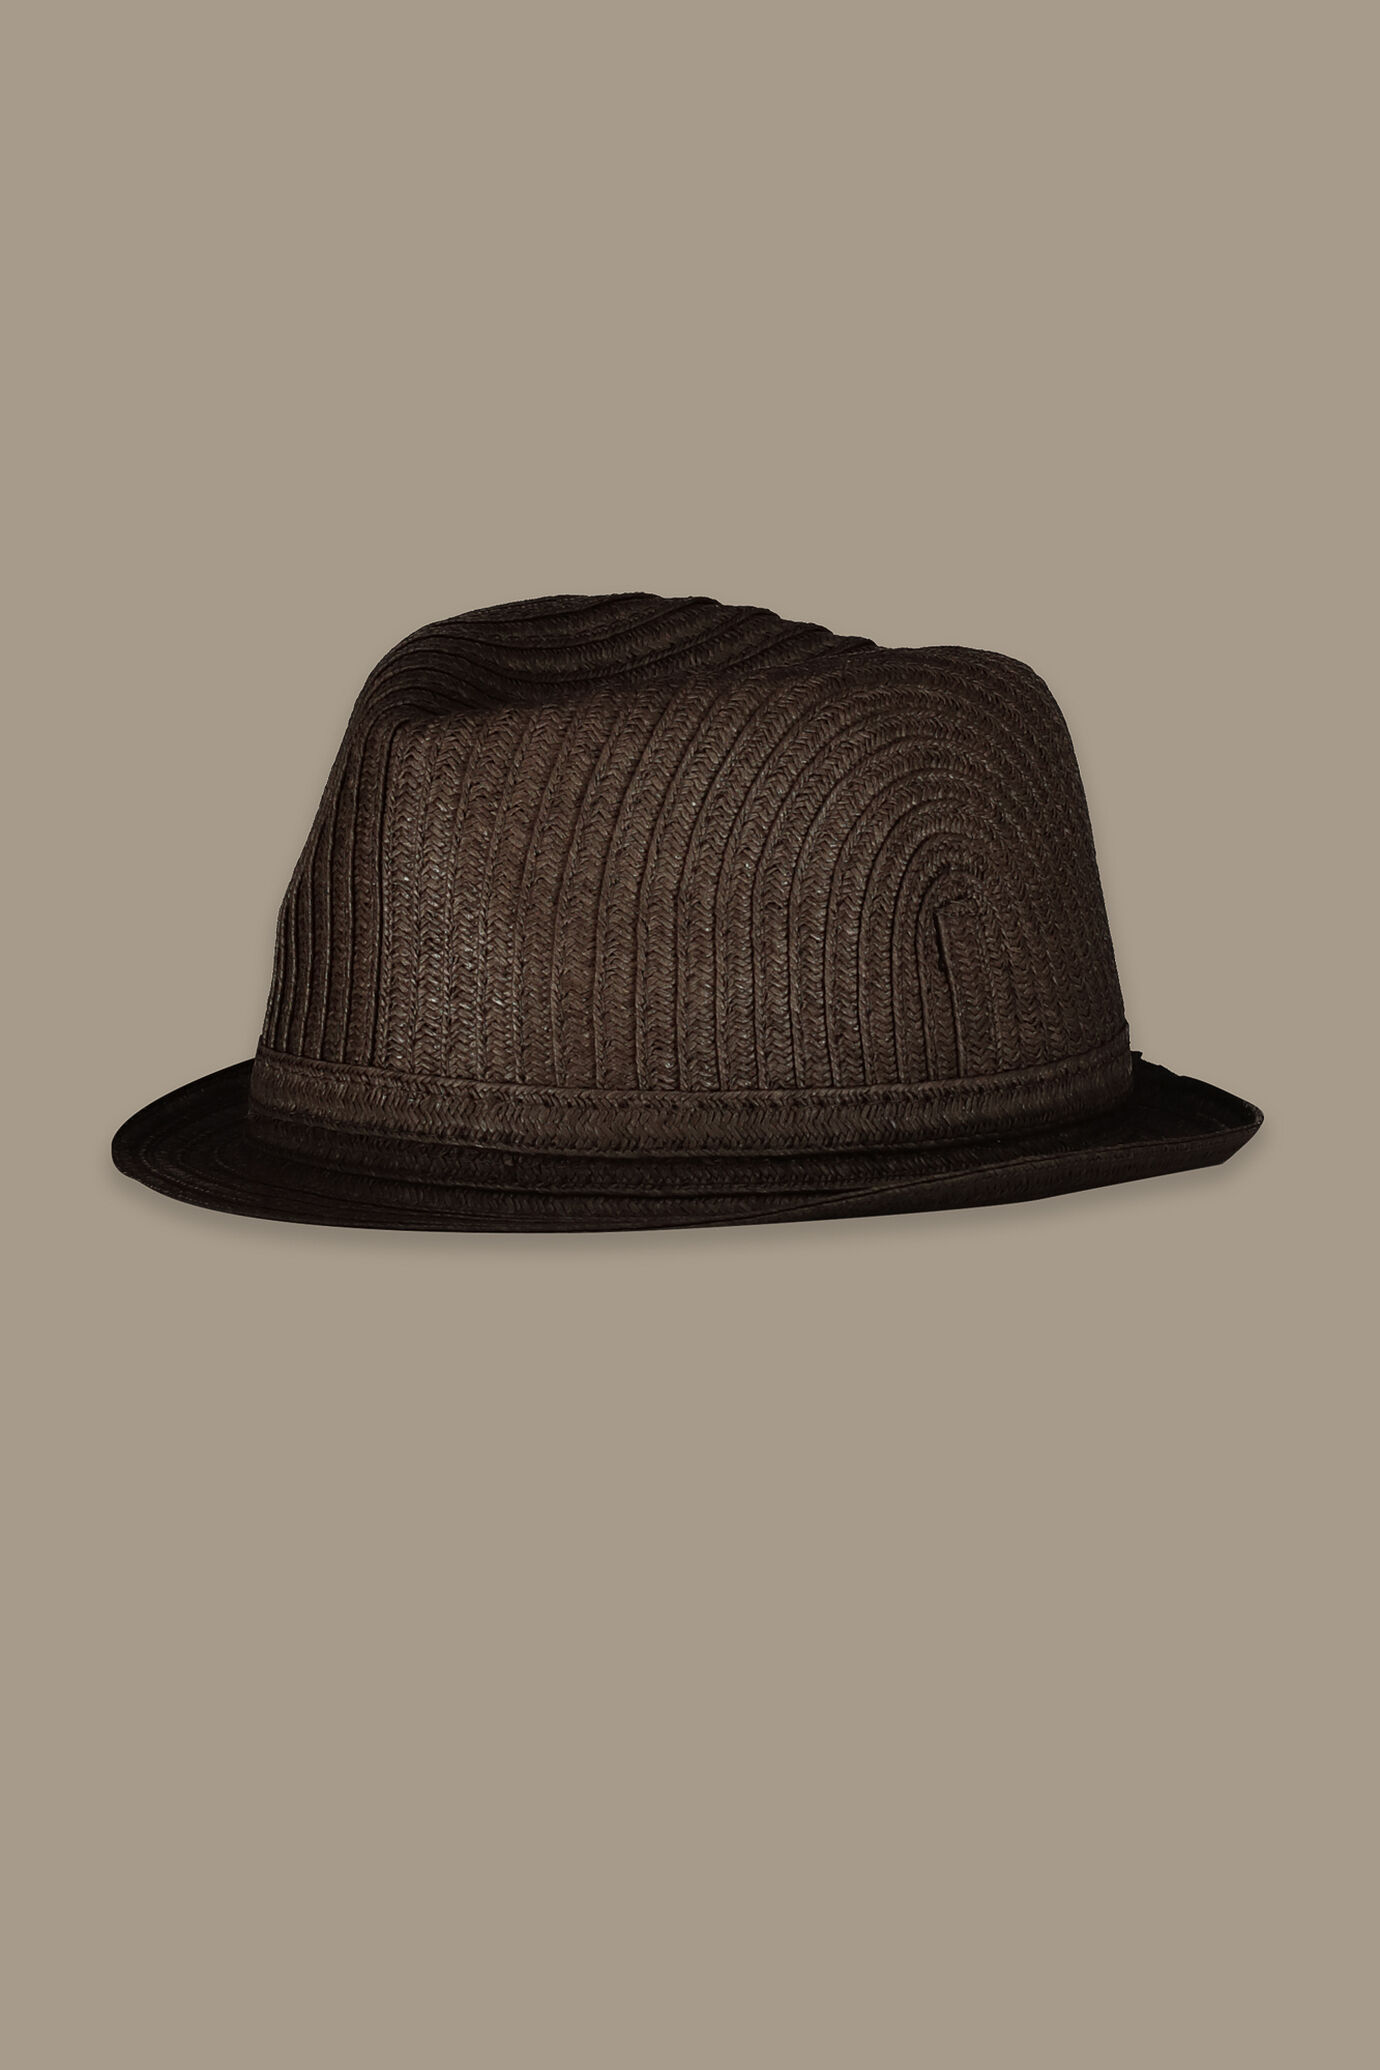 Fedora hat made from natural cellulose fiber